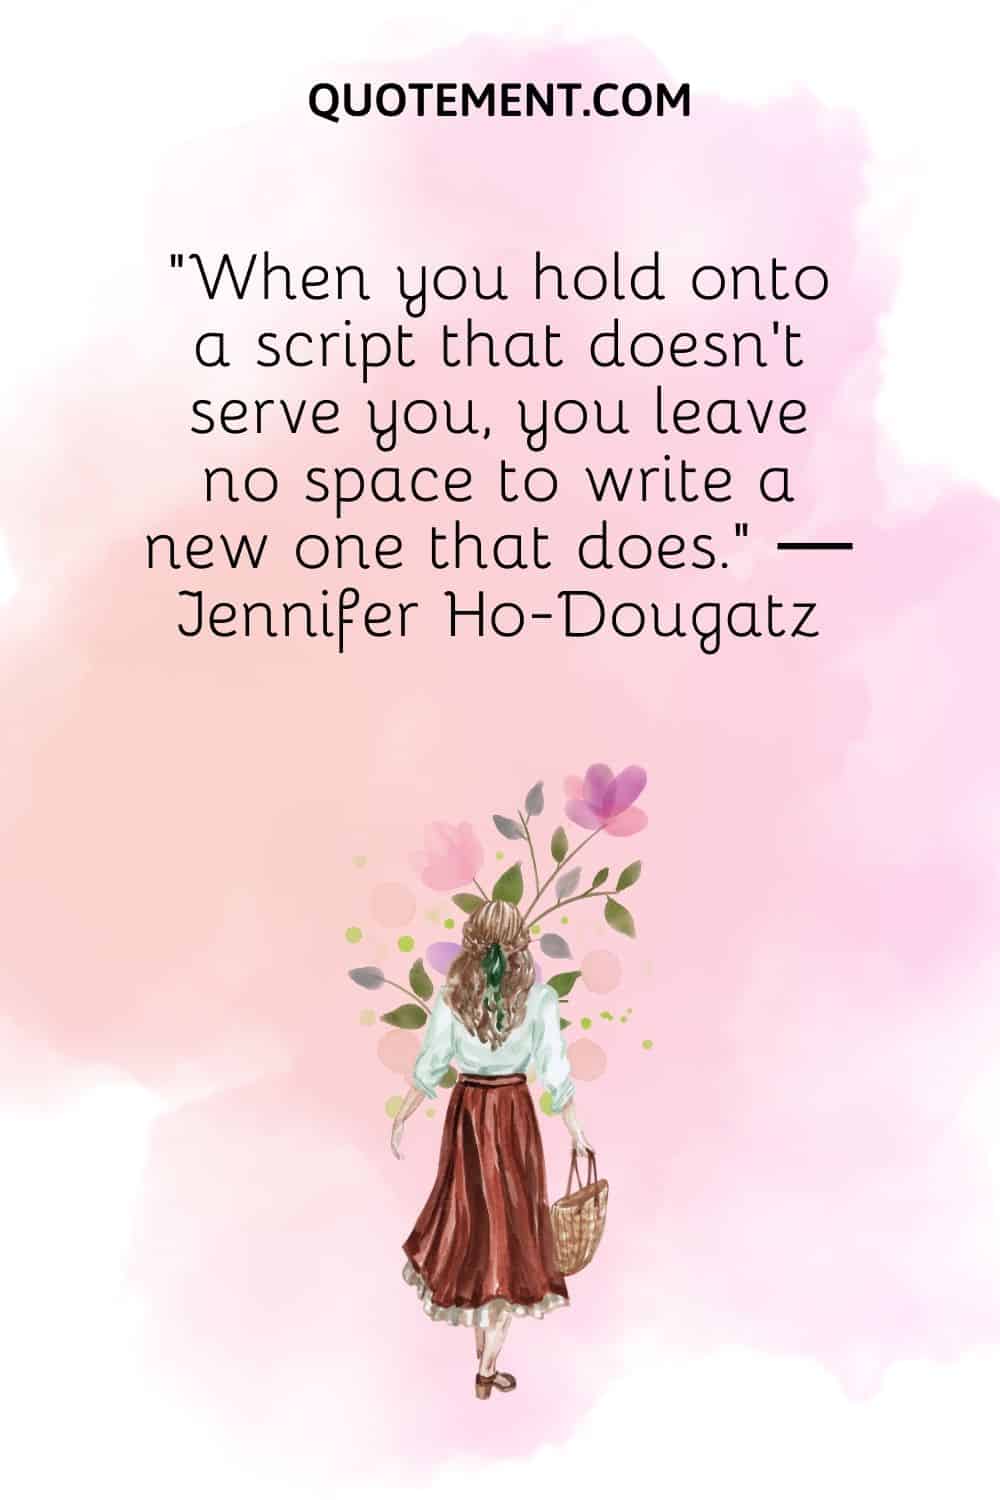 woman walking towards flowers image representing moving away quote